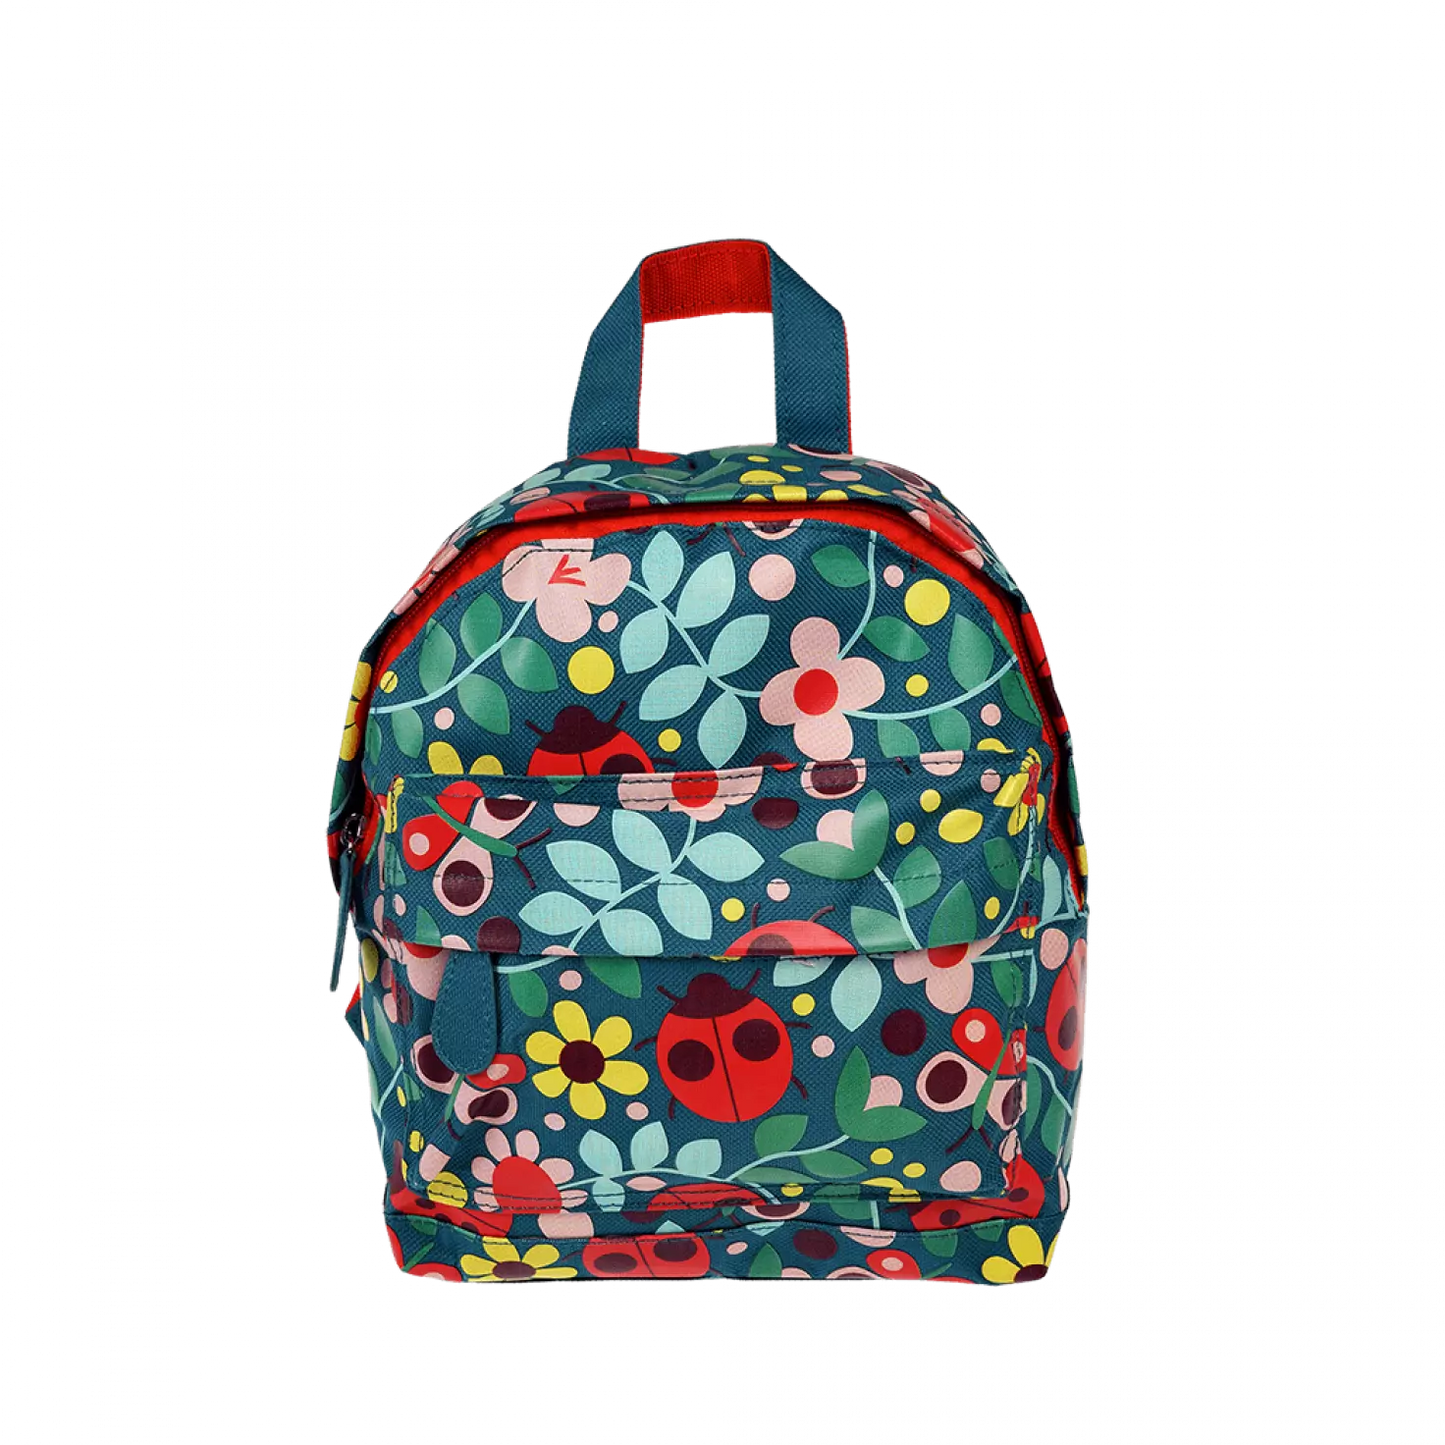 A childs backpack by Rex London, style Ladybird, in blue with multi ladybird and floral print. Two compartments with zip fastening. Front view.